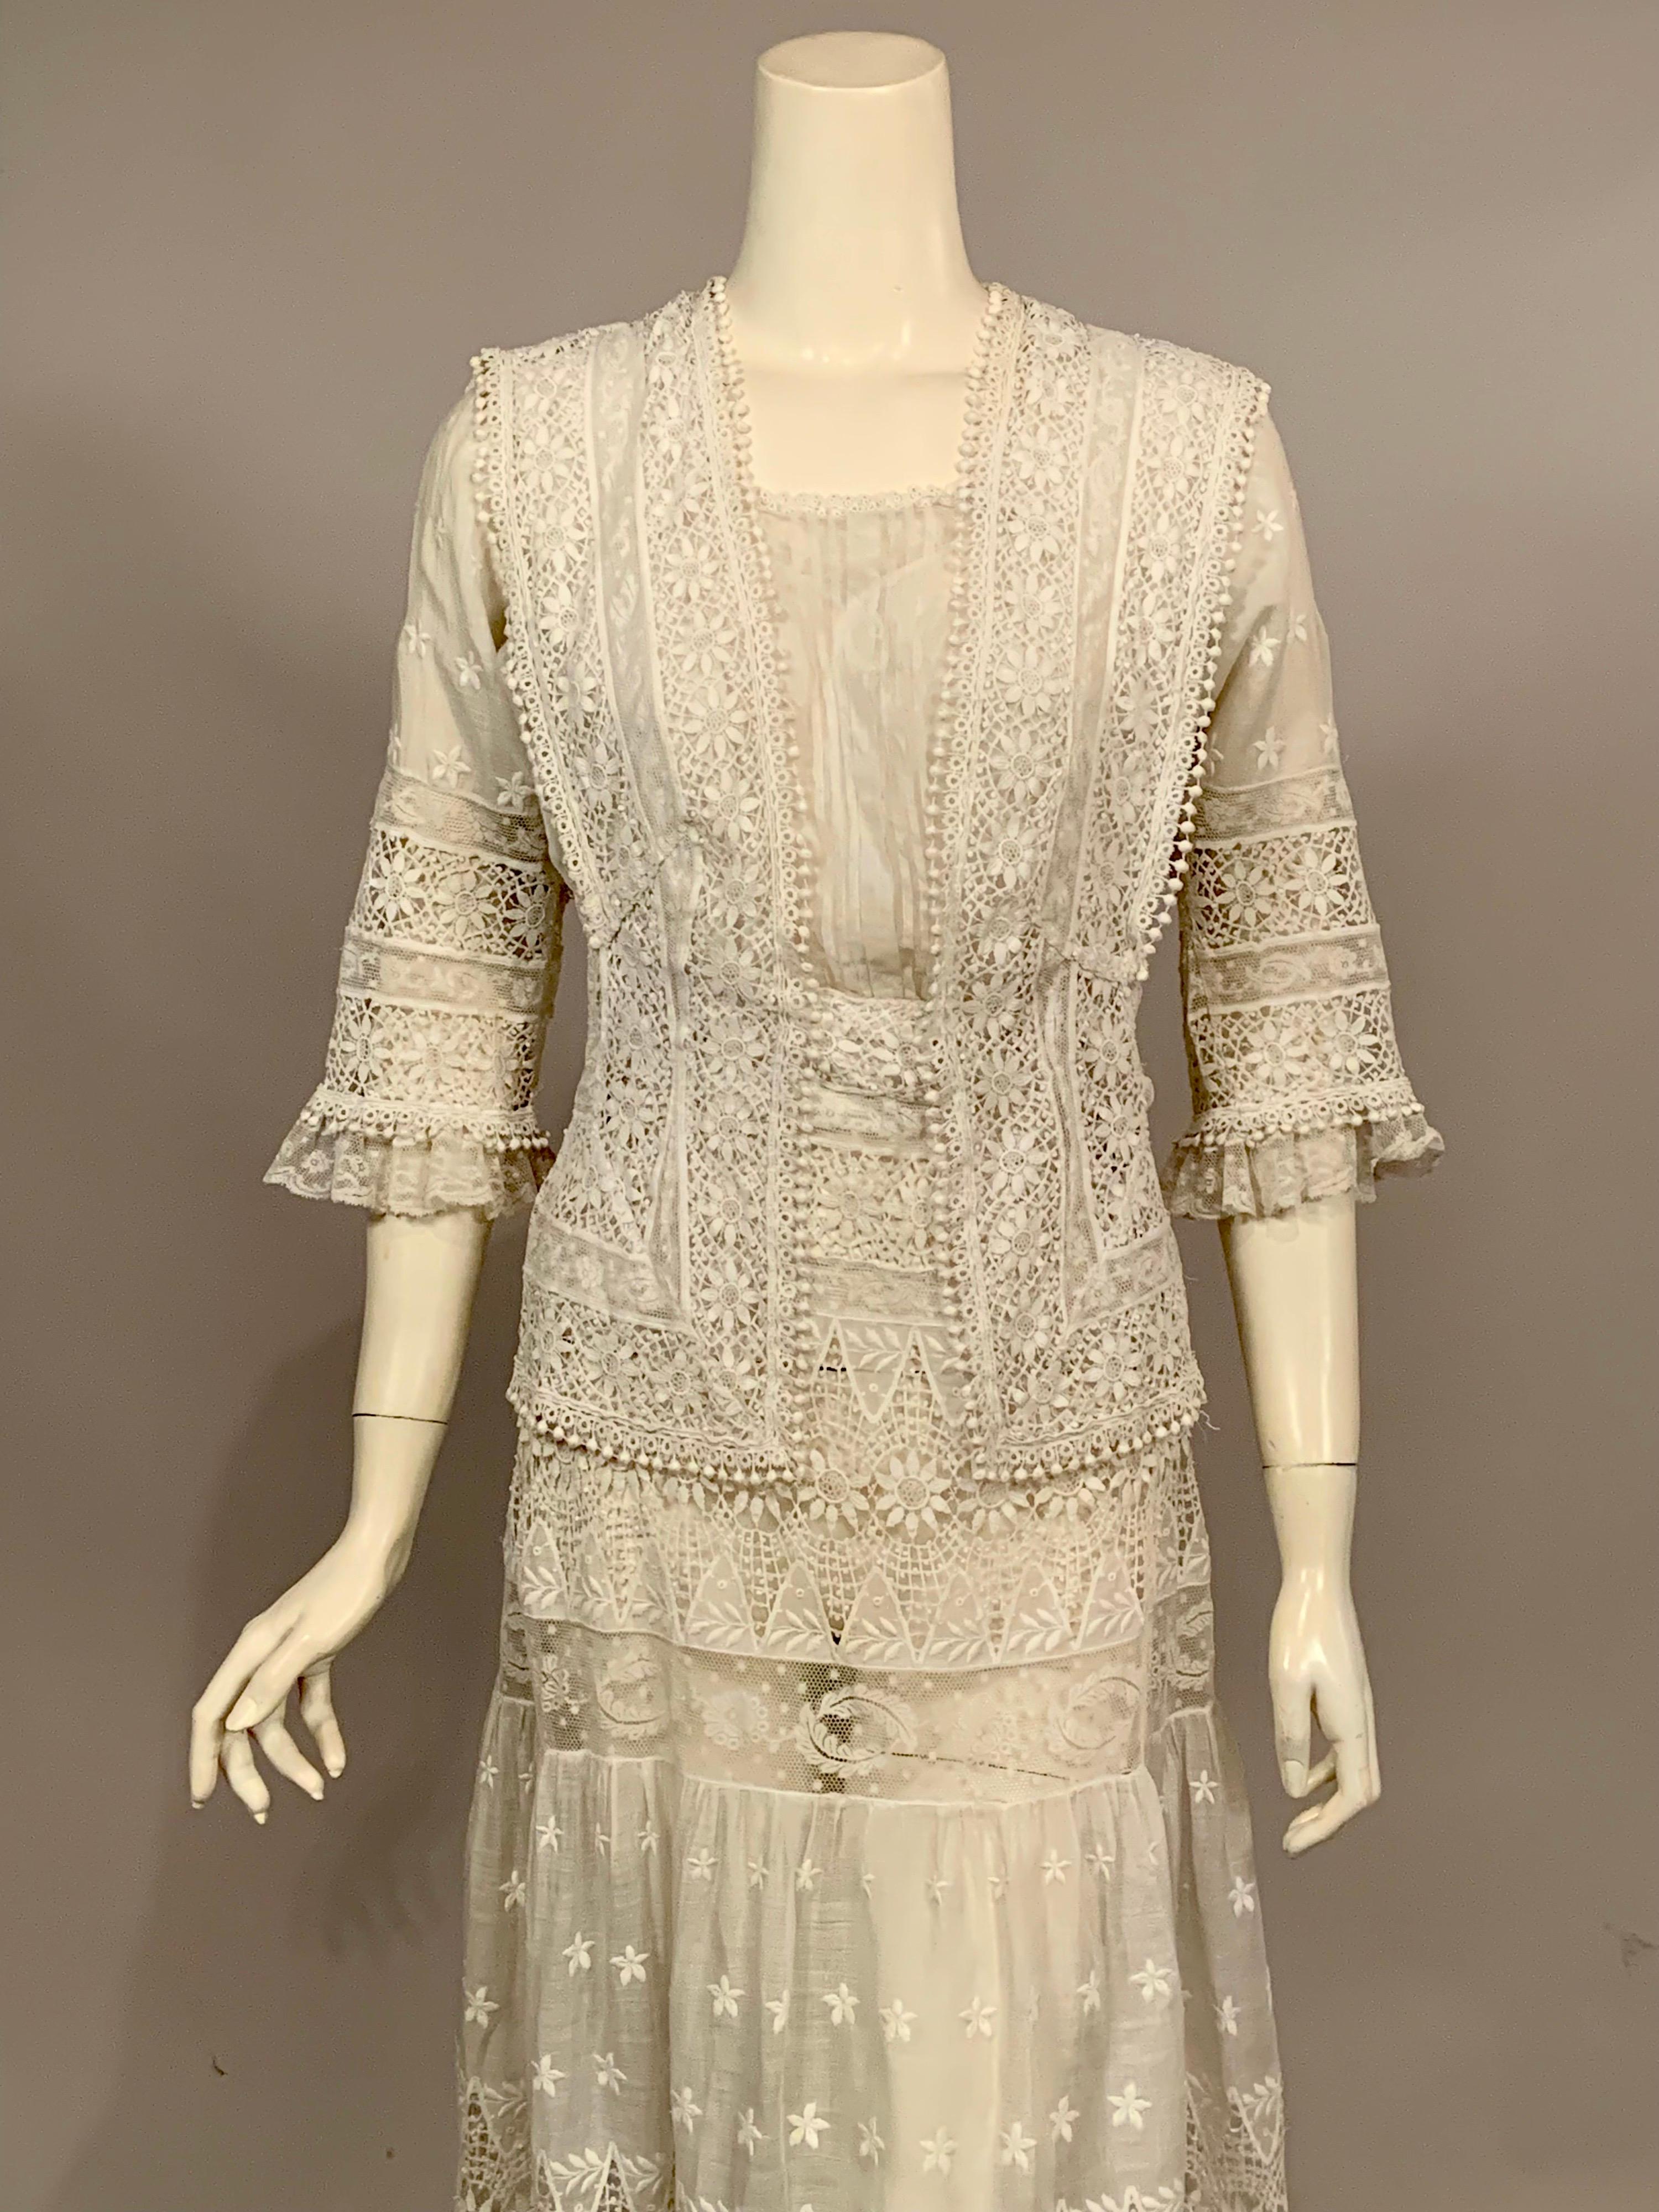 This vintage Edwardian Dress has all of the bells and whistles It has a square neckline, a left side of center front opening, three quarter length ruffled lace sleeves, and a faux 